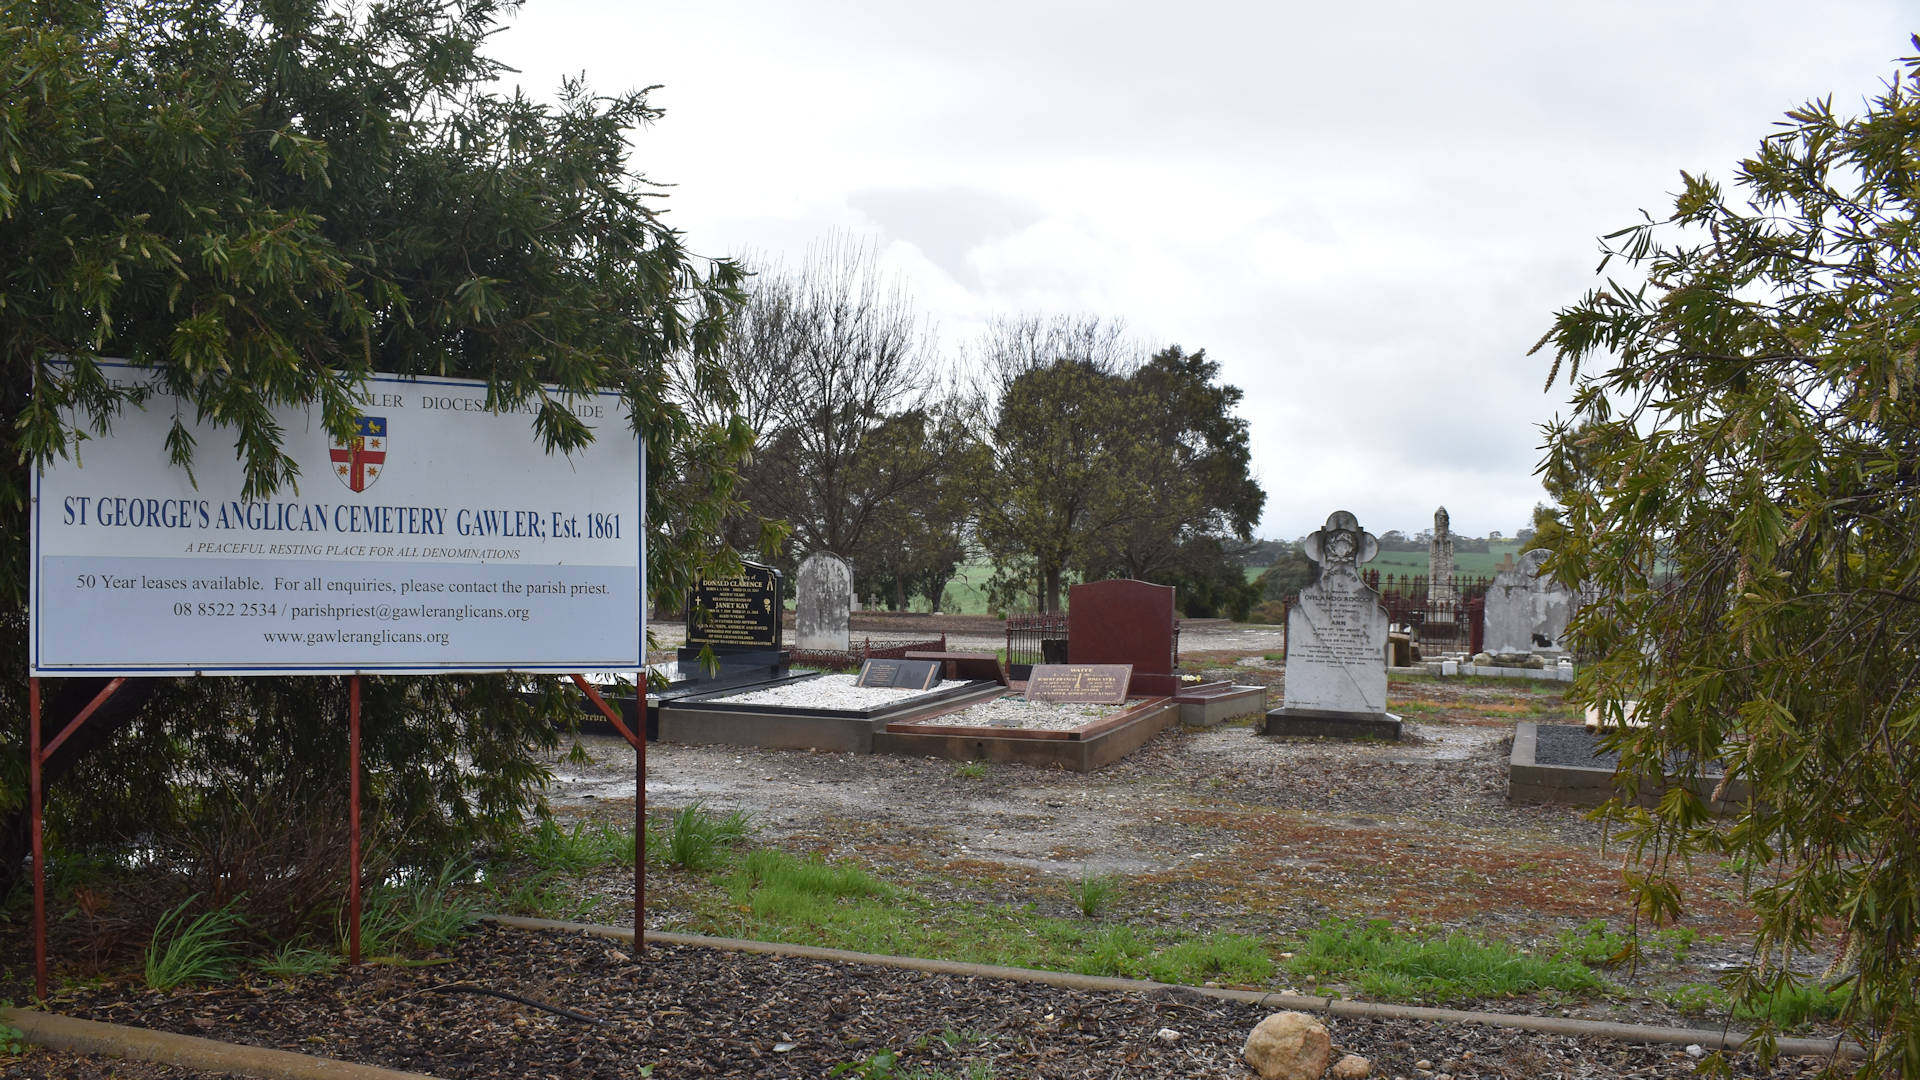 Front of the St George Anglican Cemetery in Gawler, established 1861